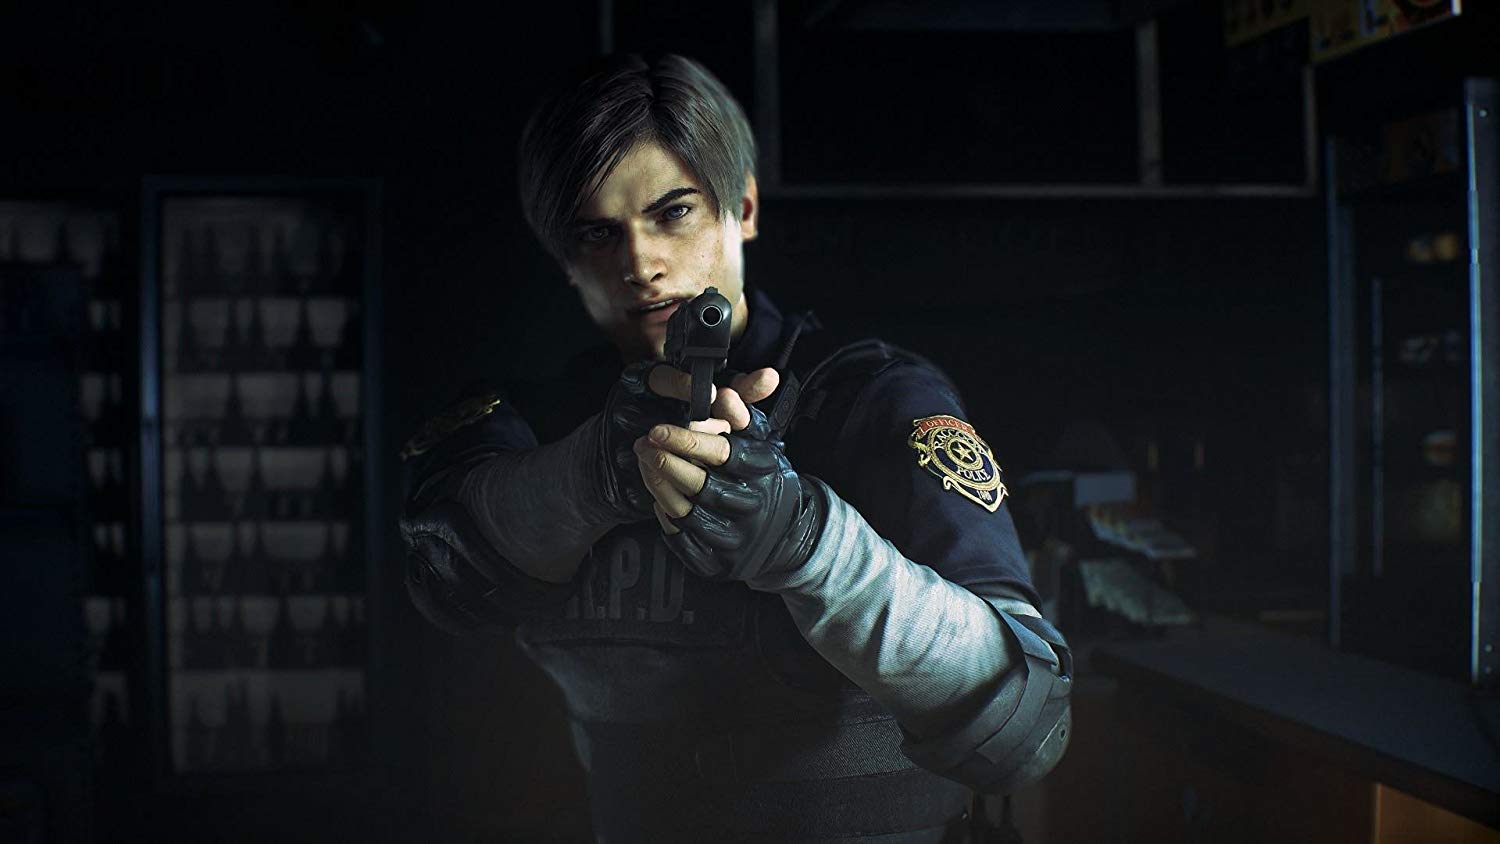 re2ps4